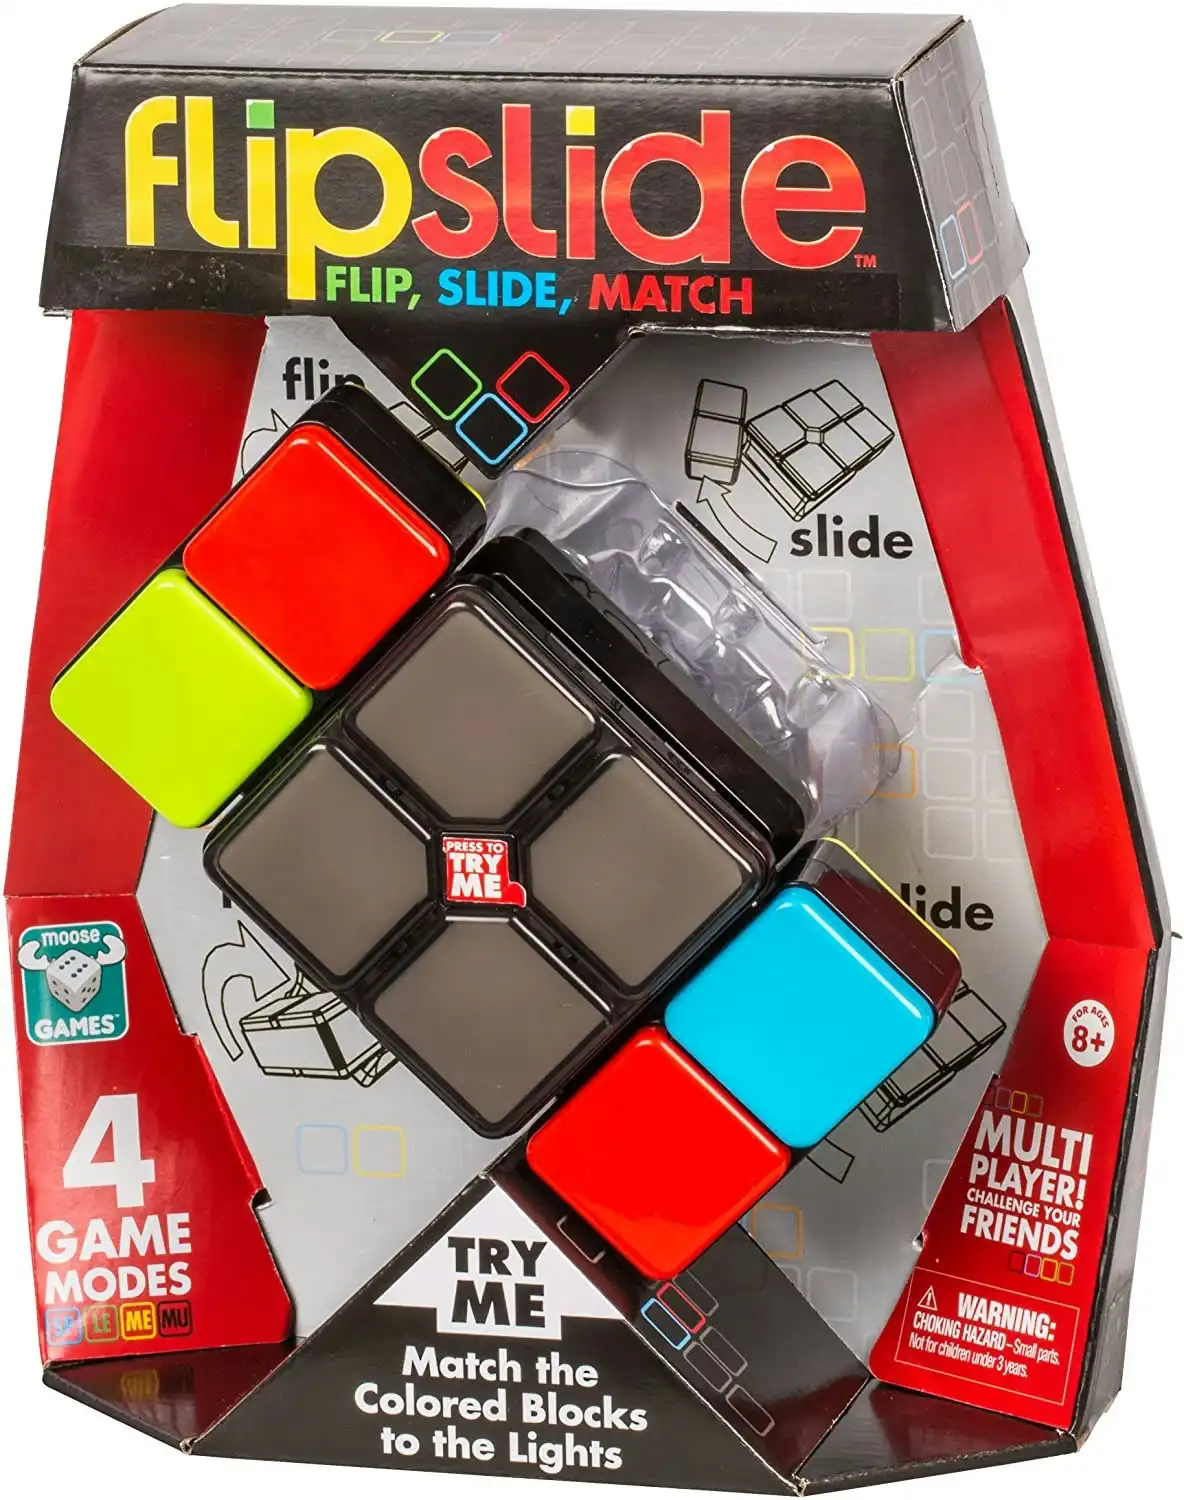 Flipslide Handheld Electronic Game Beat The Clock With 4 Game Modes Multiplayer Fun